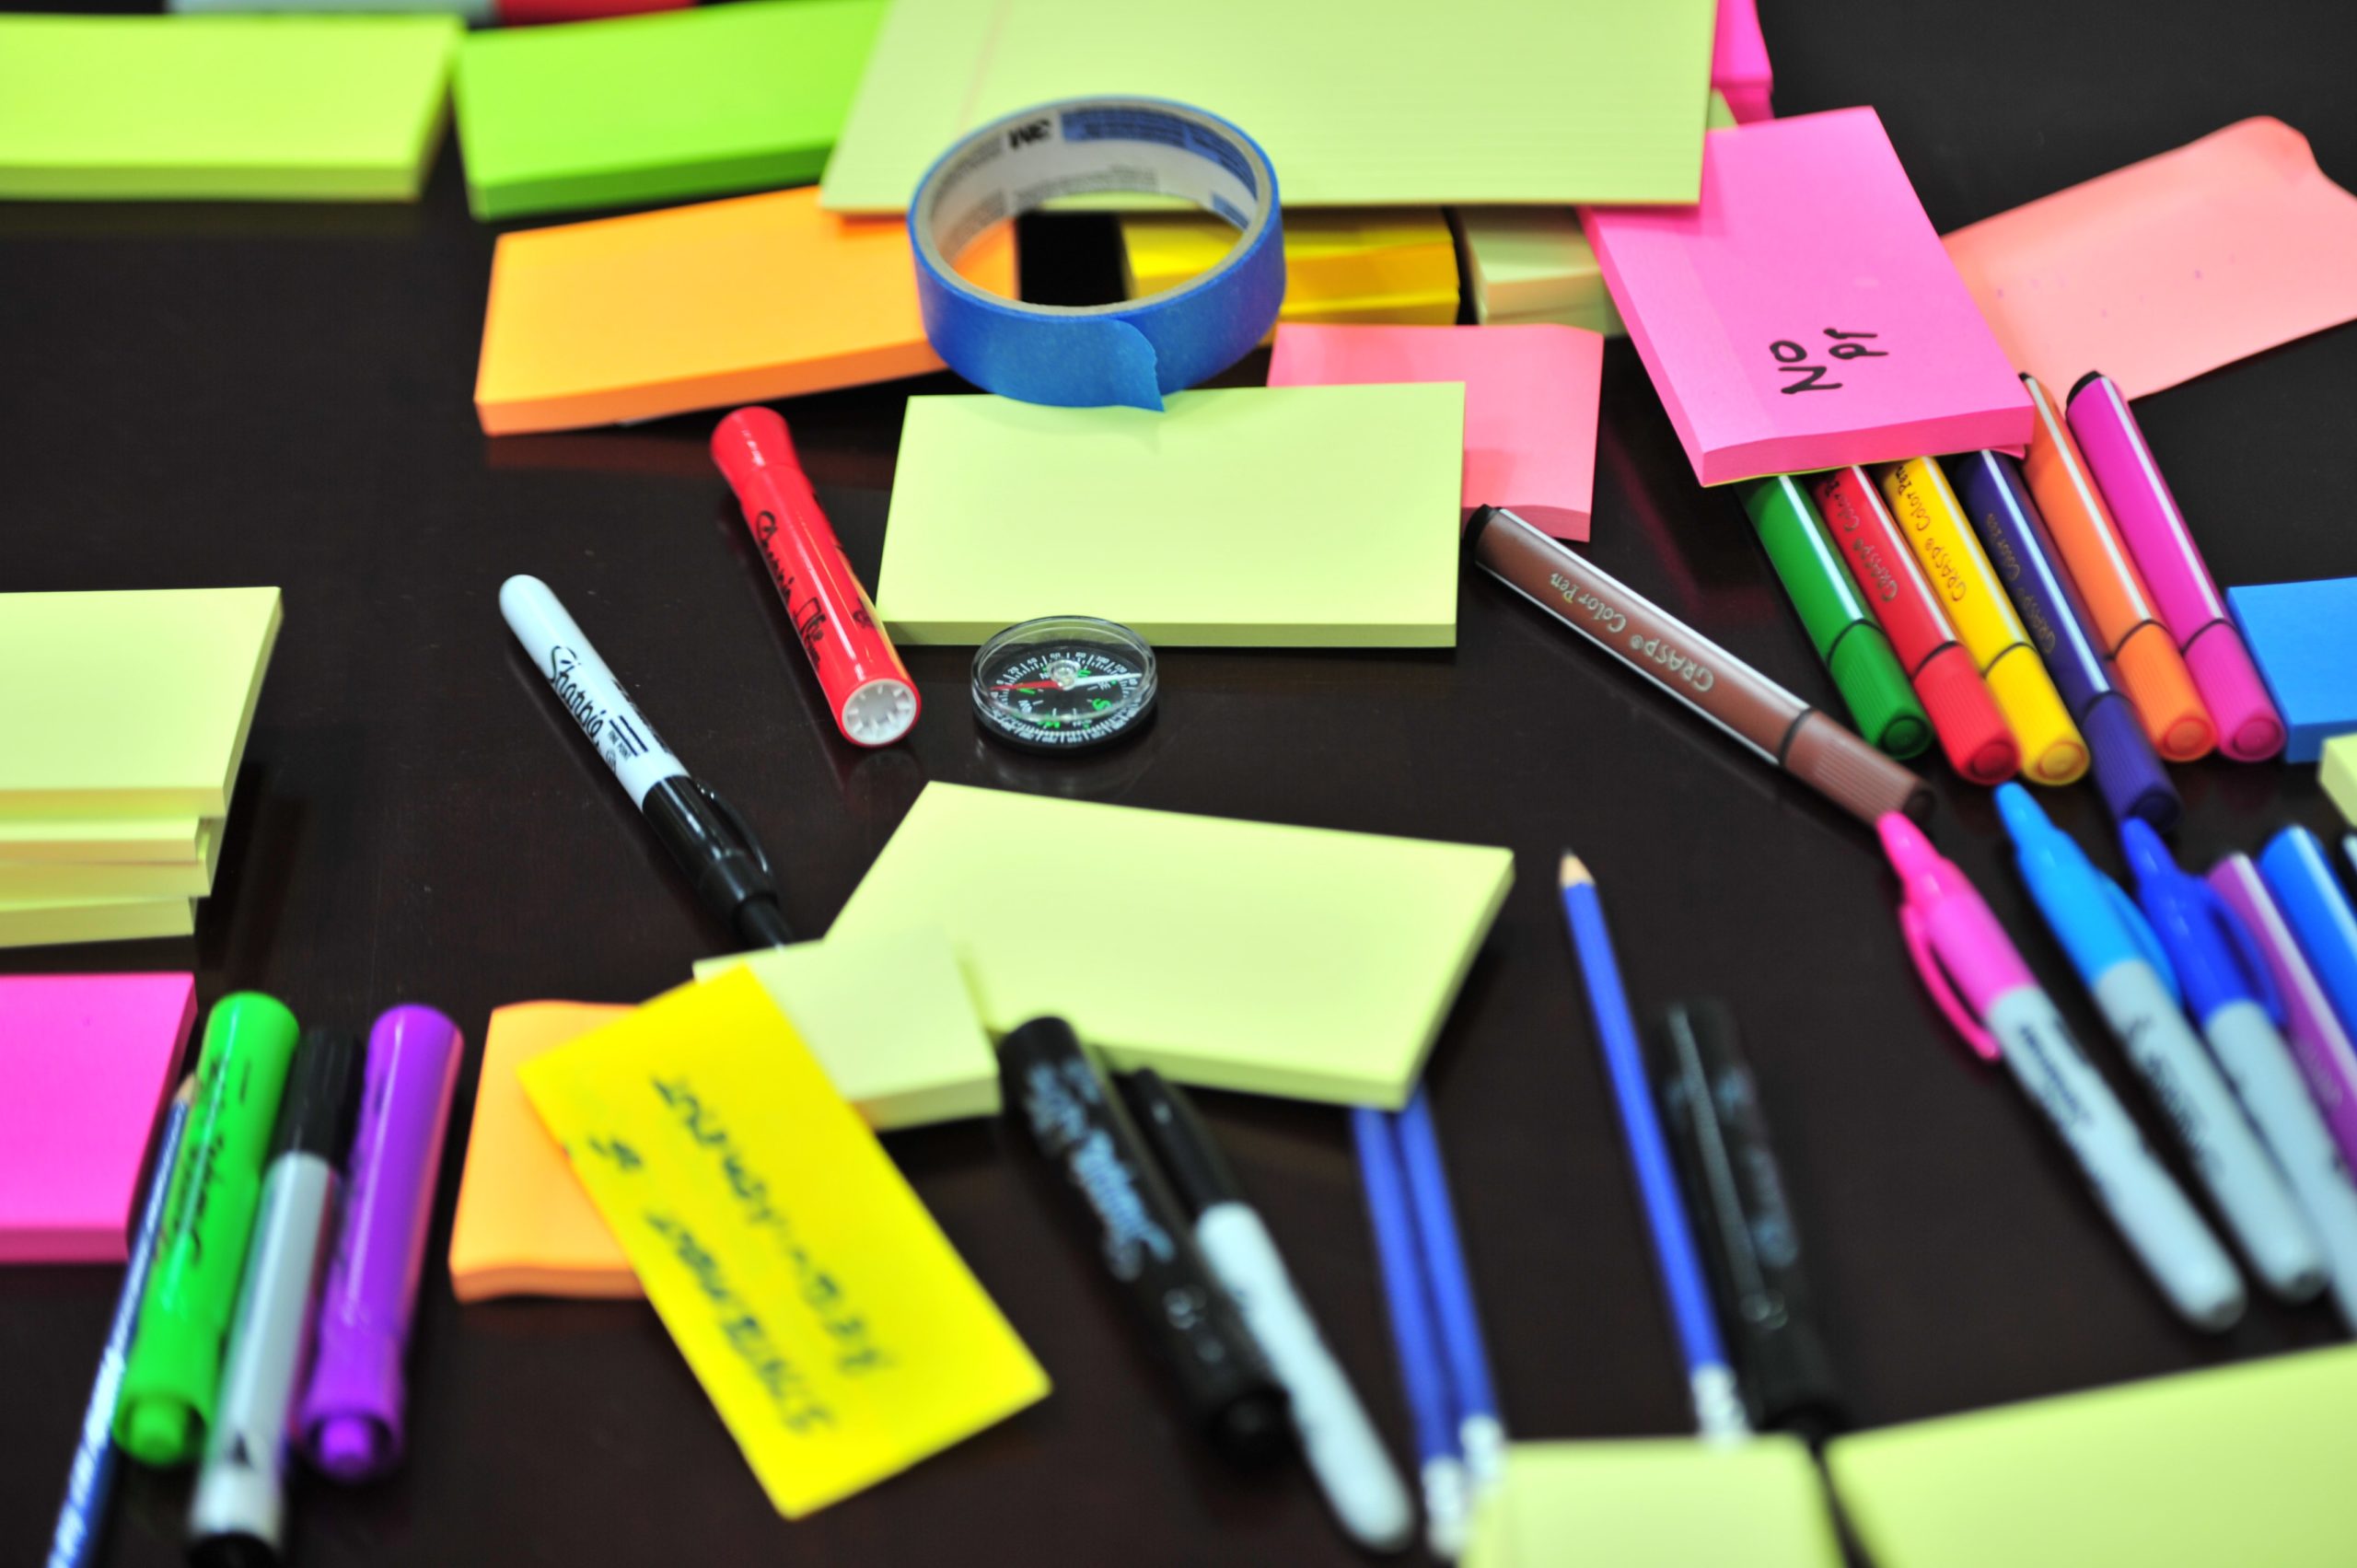 A desk scattered with colorful stationary supplies.